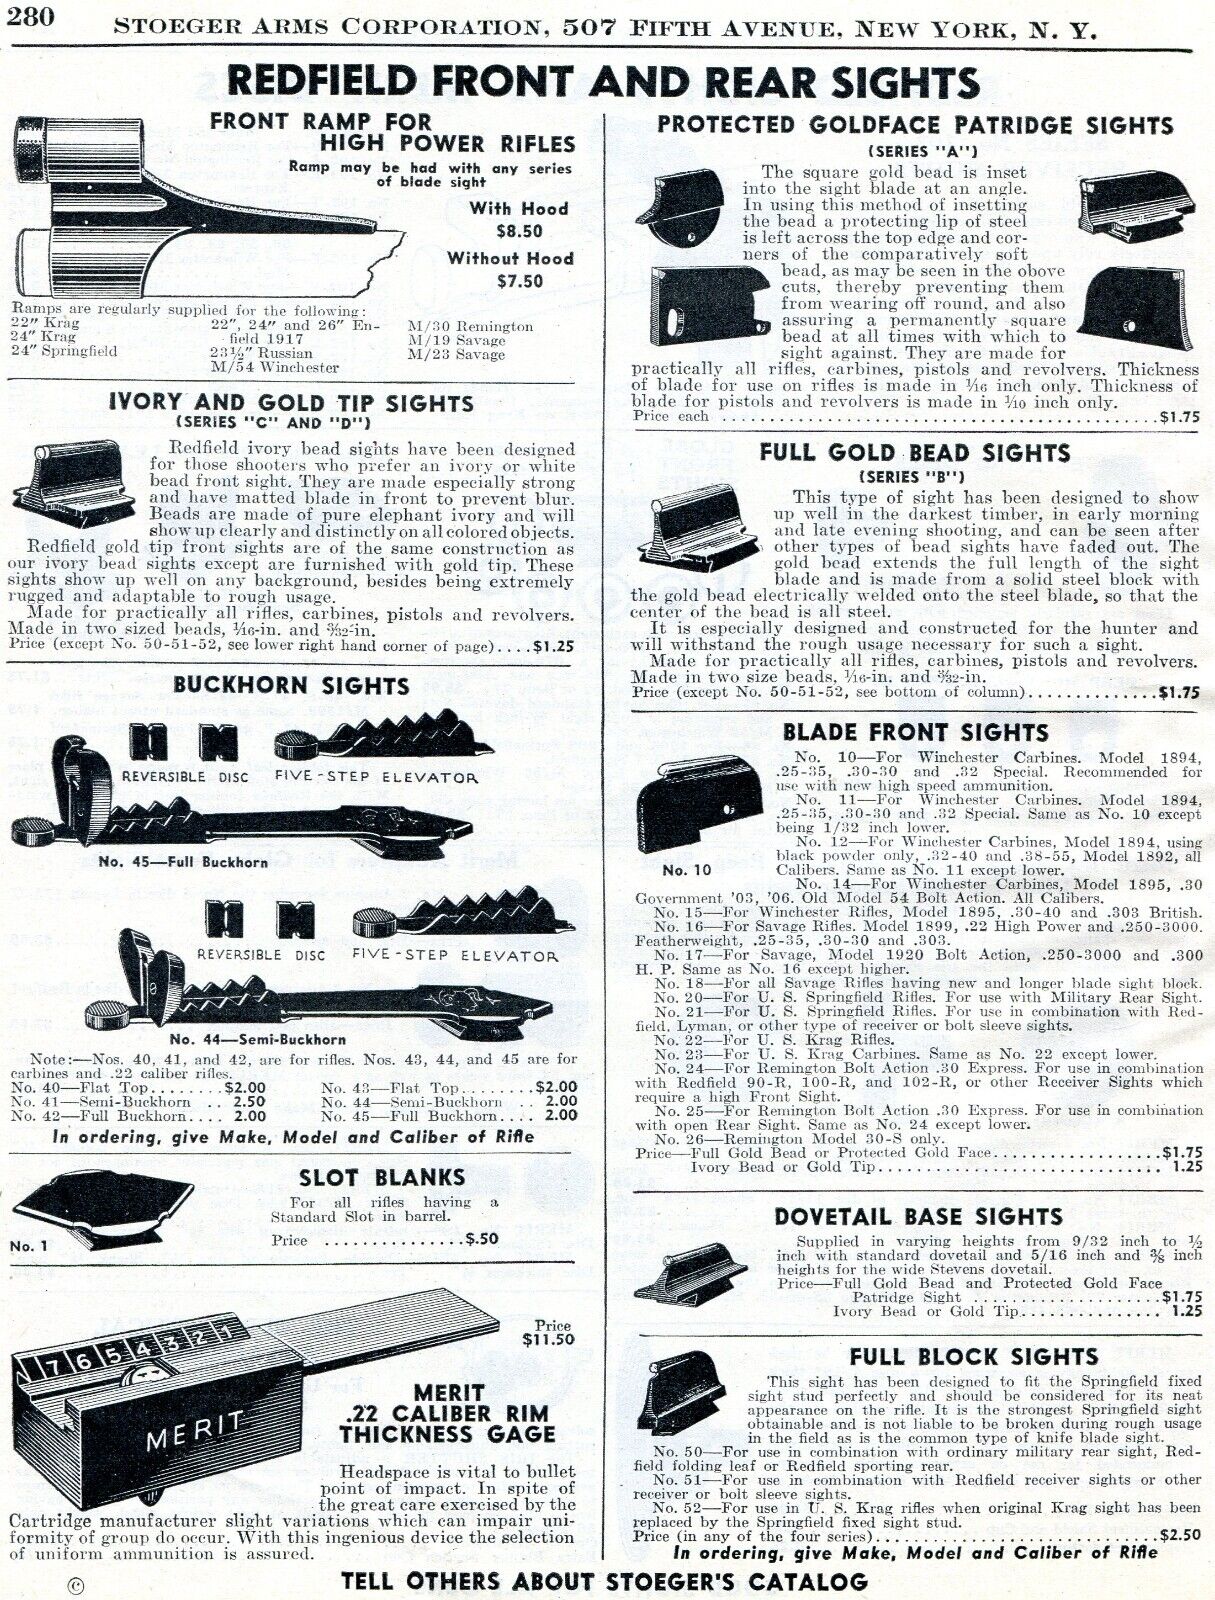 1947 Print Ad of Redfield Front and Rear Rifle Carbine Shotgun Sights